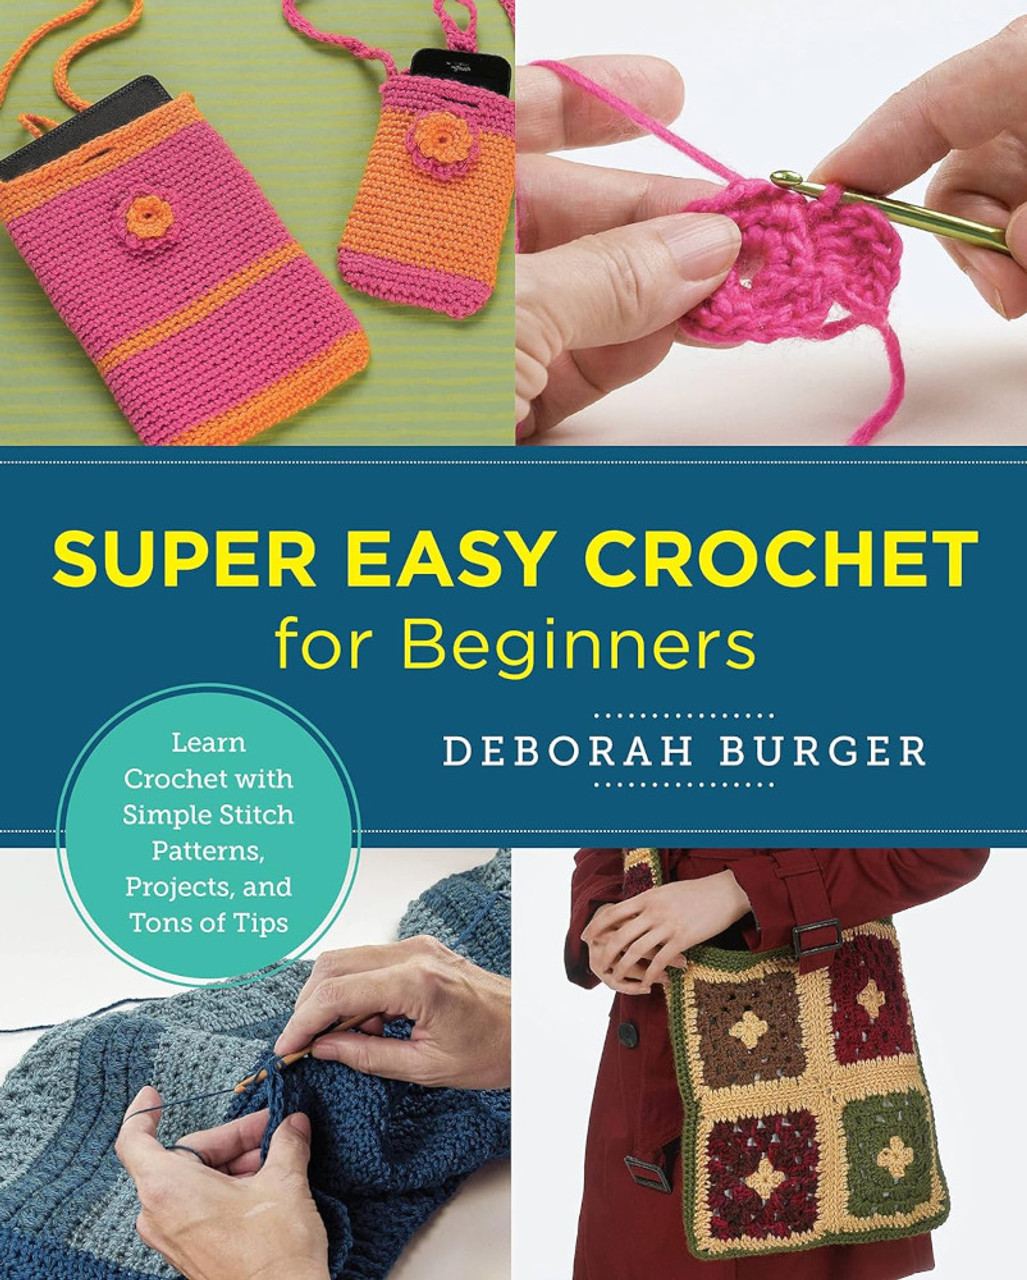 Super Easy Crochet for Beginners - The Websters